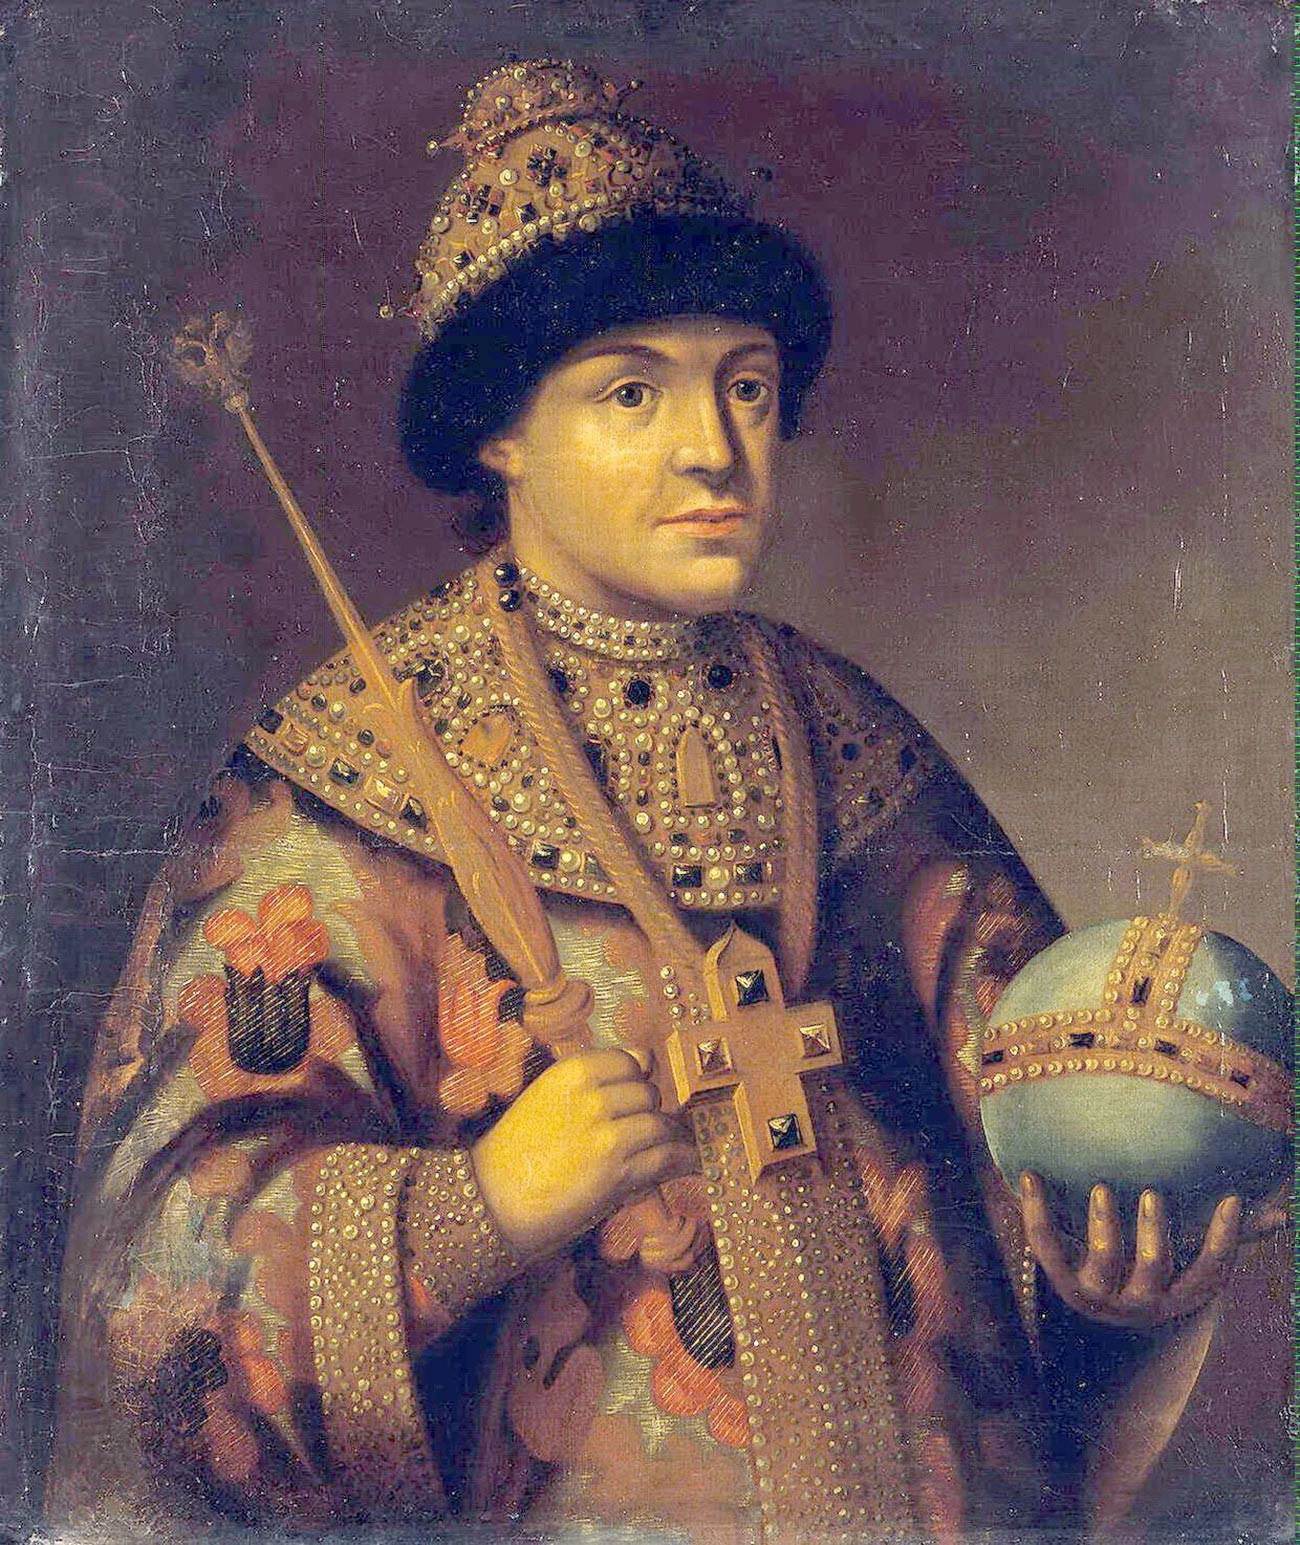 Tsar Fedor Alexeyevich (1661-1682). His younger brother Ivan (1666-1696) was probably mentally disabled.